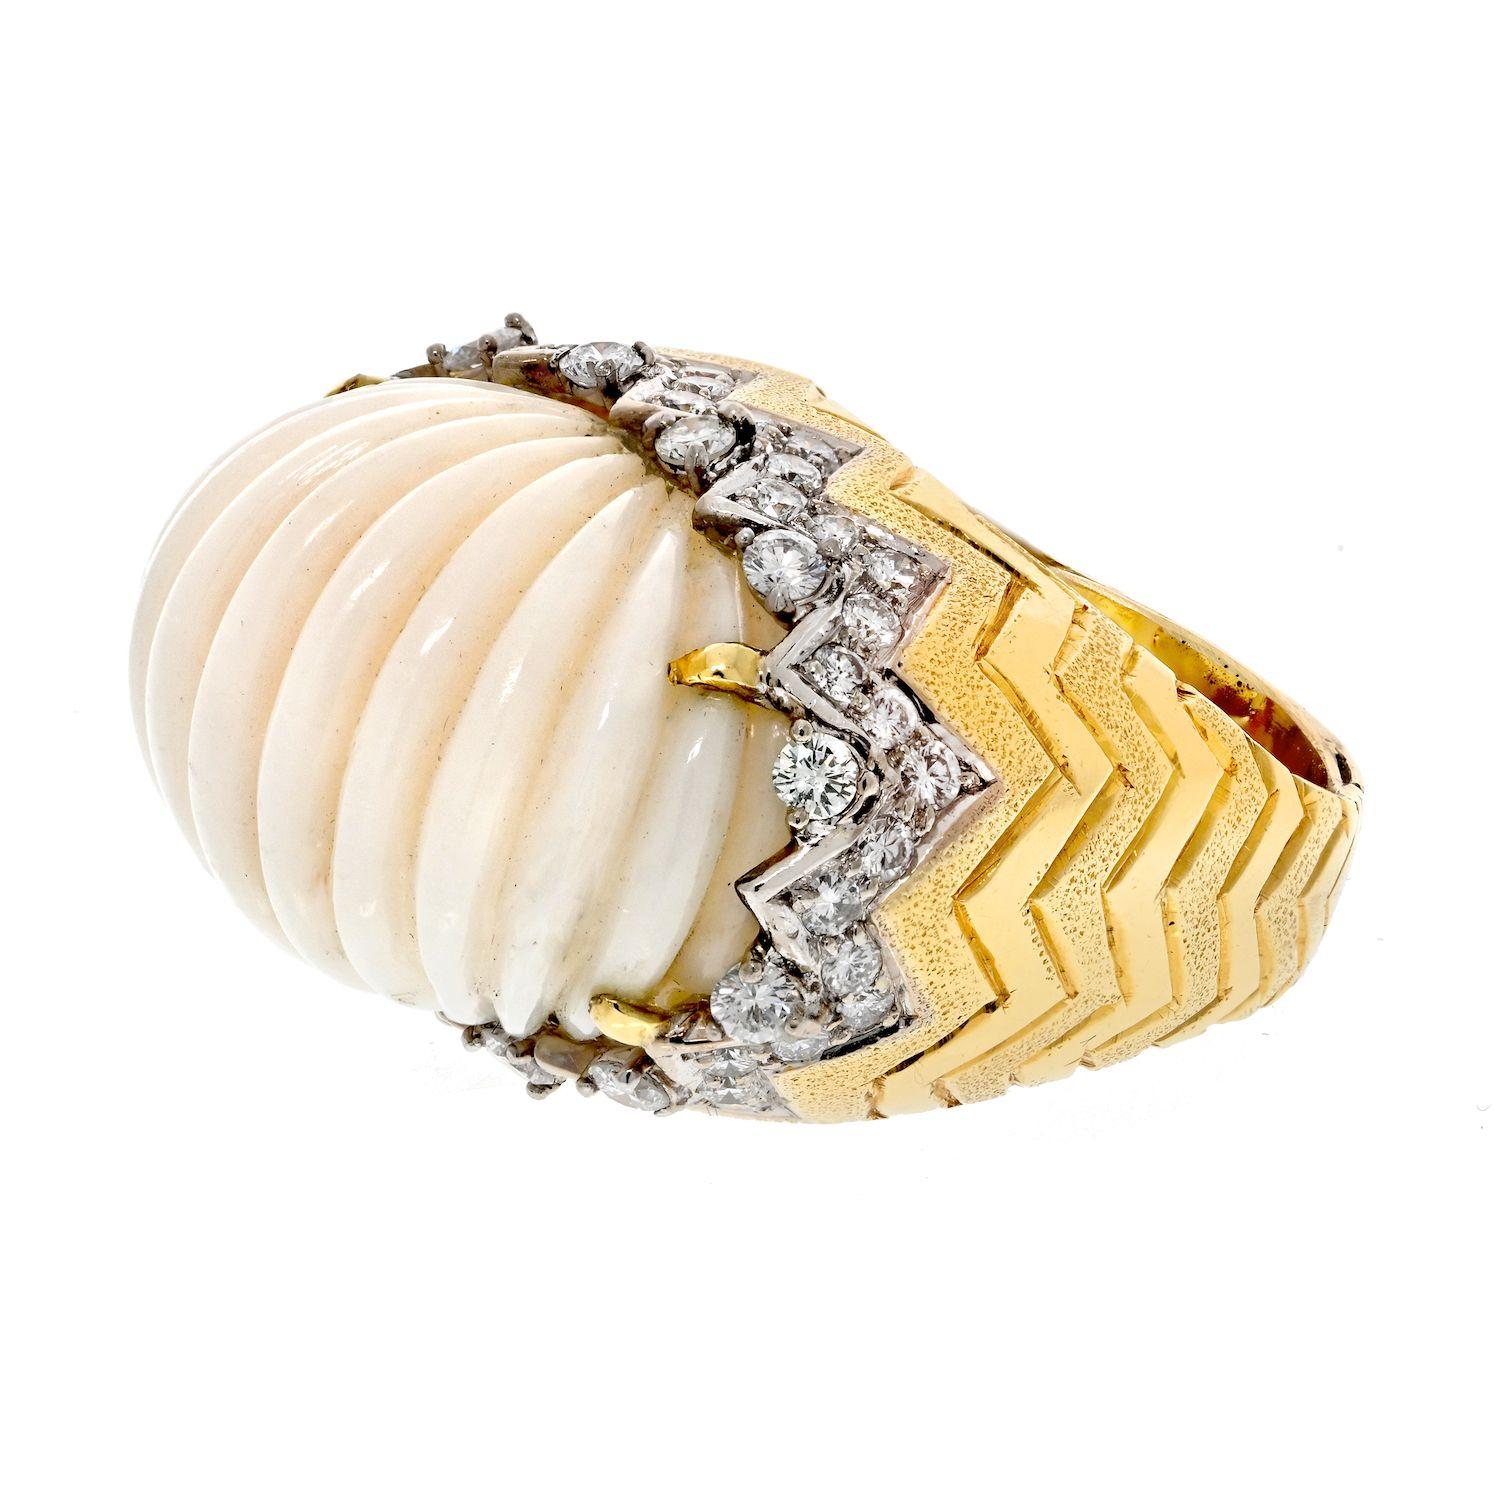 The 18K Yellow Gold Angel Skin Fluted Coral and Diamond Ring is a captivating piece of jewelry that exudes elegance and sophistication. Crafted in 18K yellow gold, this ring features a fluted design adorned with angel skin coral, known for its